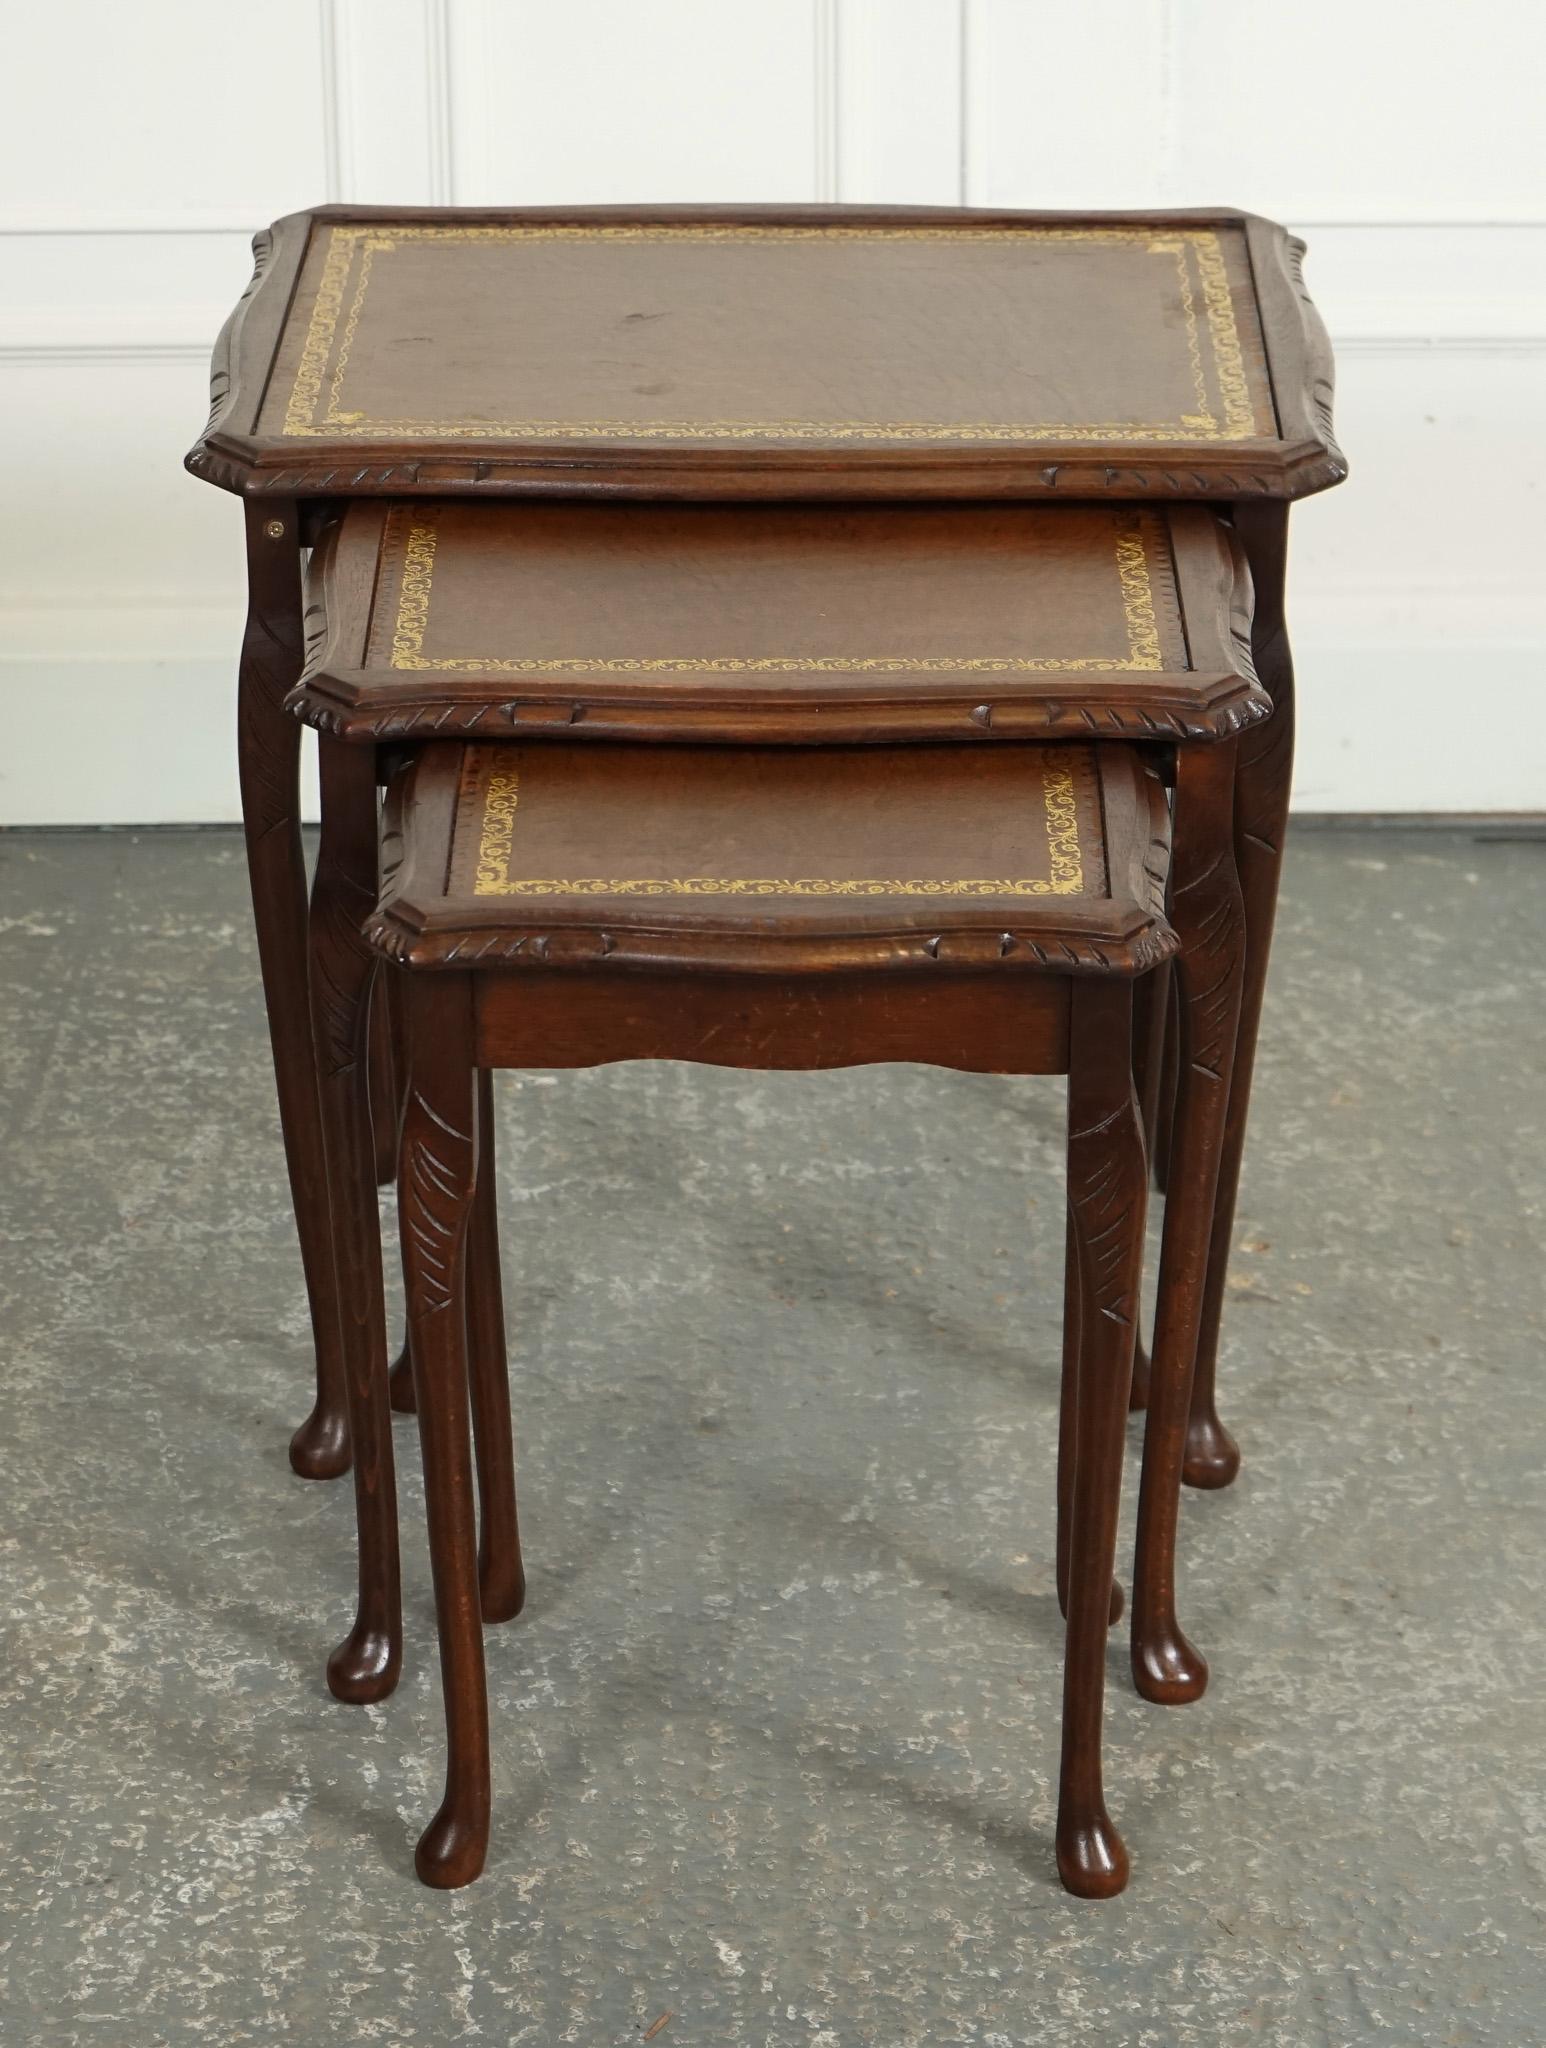 

We are delighted to offer for sale this Vintage Nest of Tables With a Lovely Brown Leather Top.

A charming and elegant piece of furniture designed in the Queen Anne style, known for its graceful curves and refined appearance. The Queen Anne style